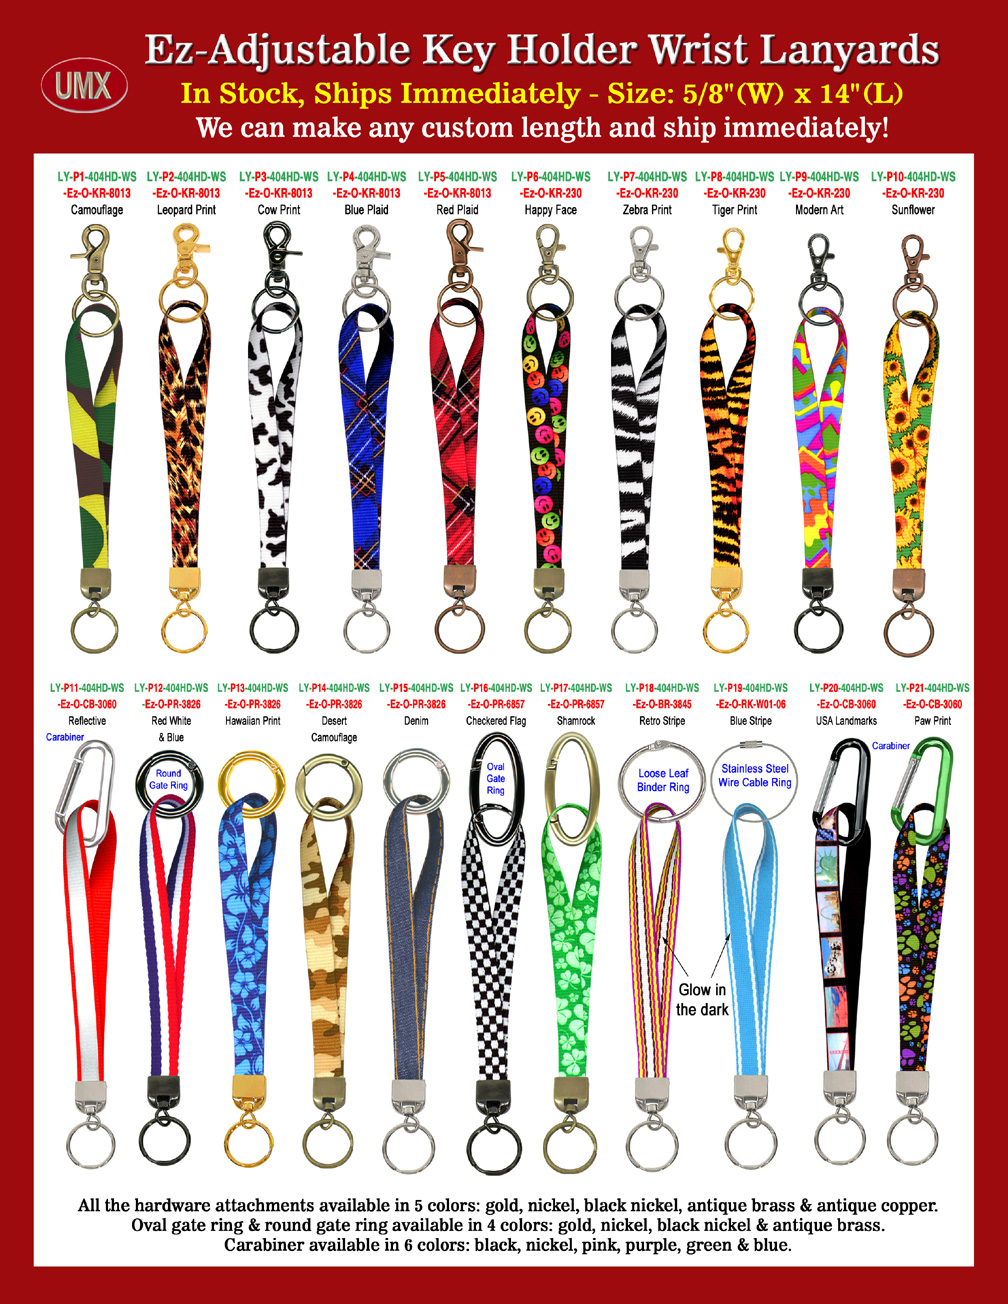 Key Holder Wrist Lanyards With Pre-Printed Forest Camouflage, Leopard, Cow Print, Blue and Red Plaid, Happy Face, Zebra Print, Tiger Print and Modern Art Themes.